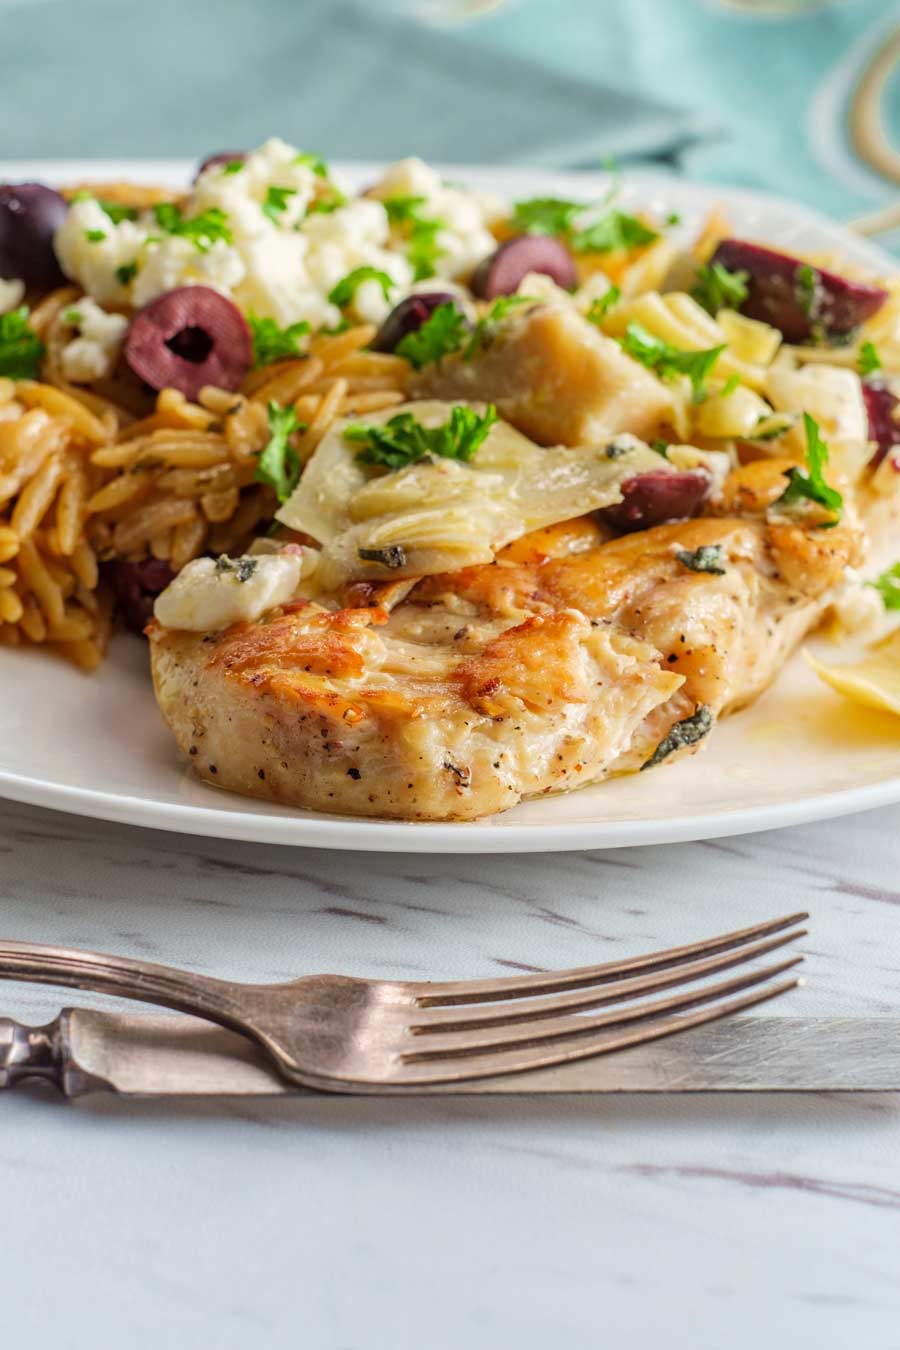 Grilled Greek Chicken with artichokes and olives